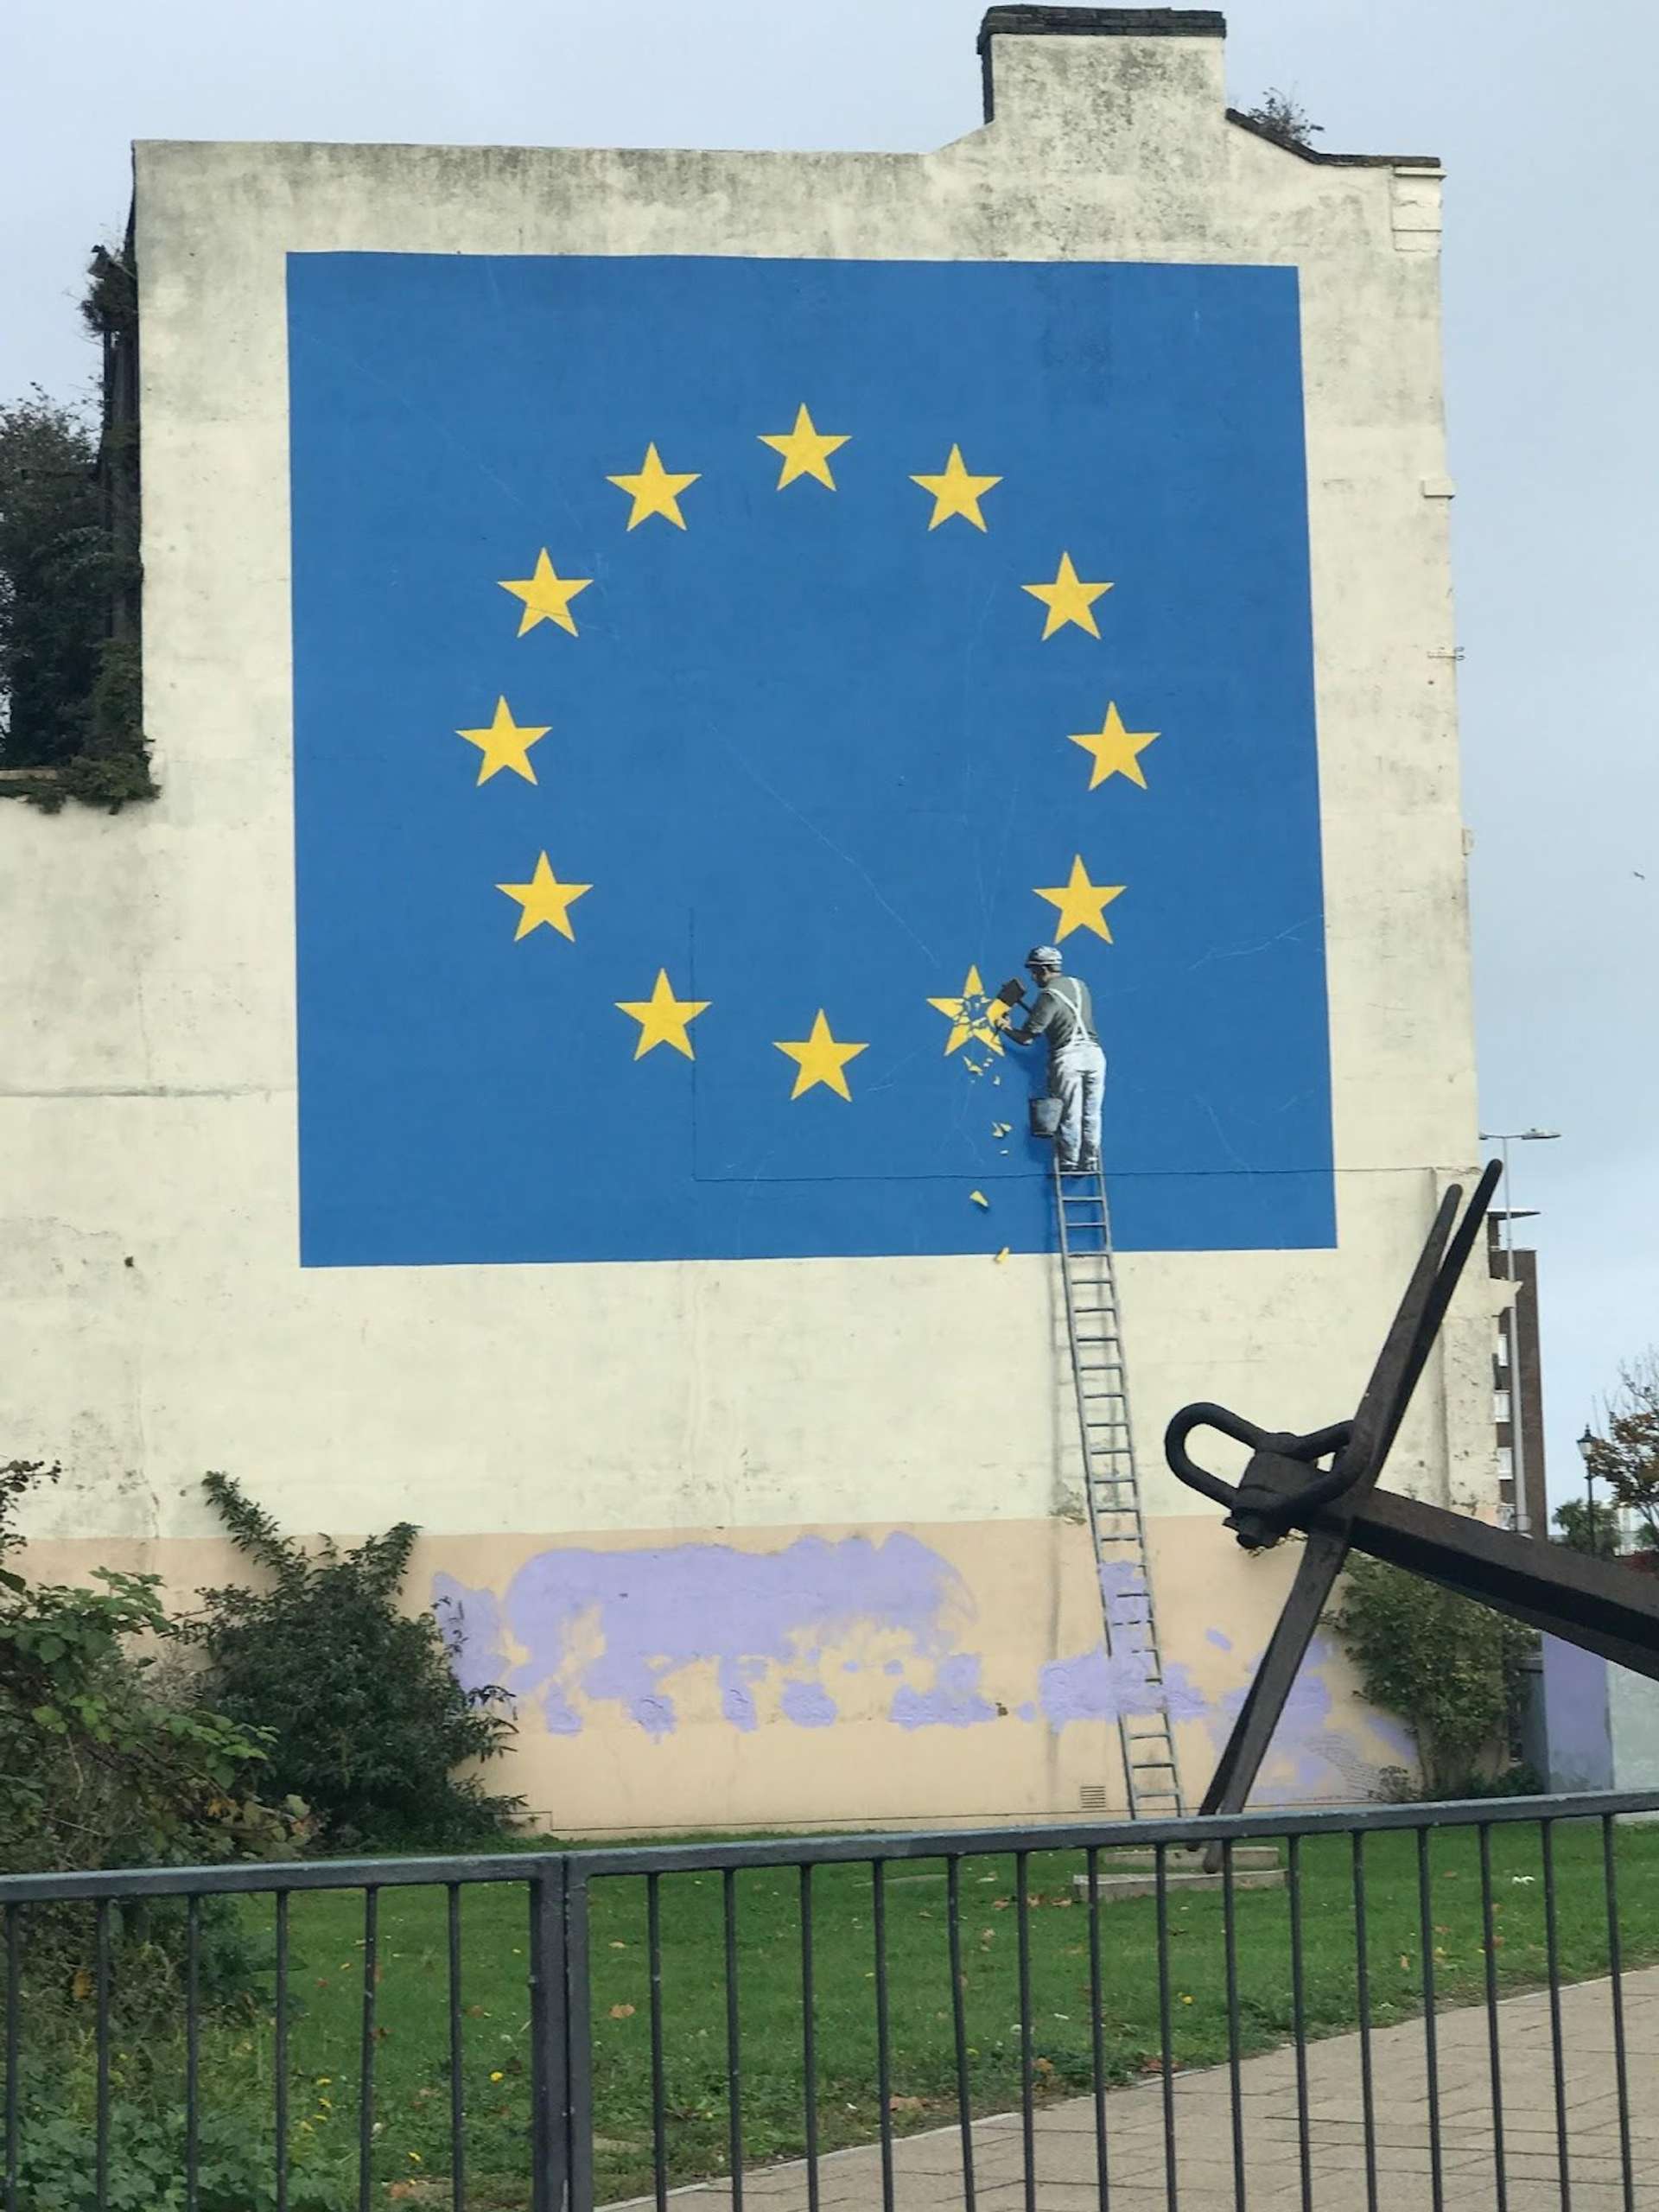 An image of the Brexit mural by Banksy. It shows a large European Union flag, in full colour, with a monochrome man on a ladder removing one of its stars.